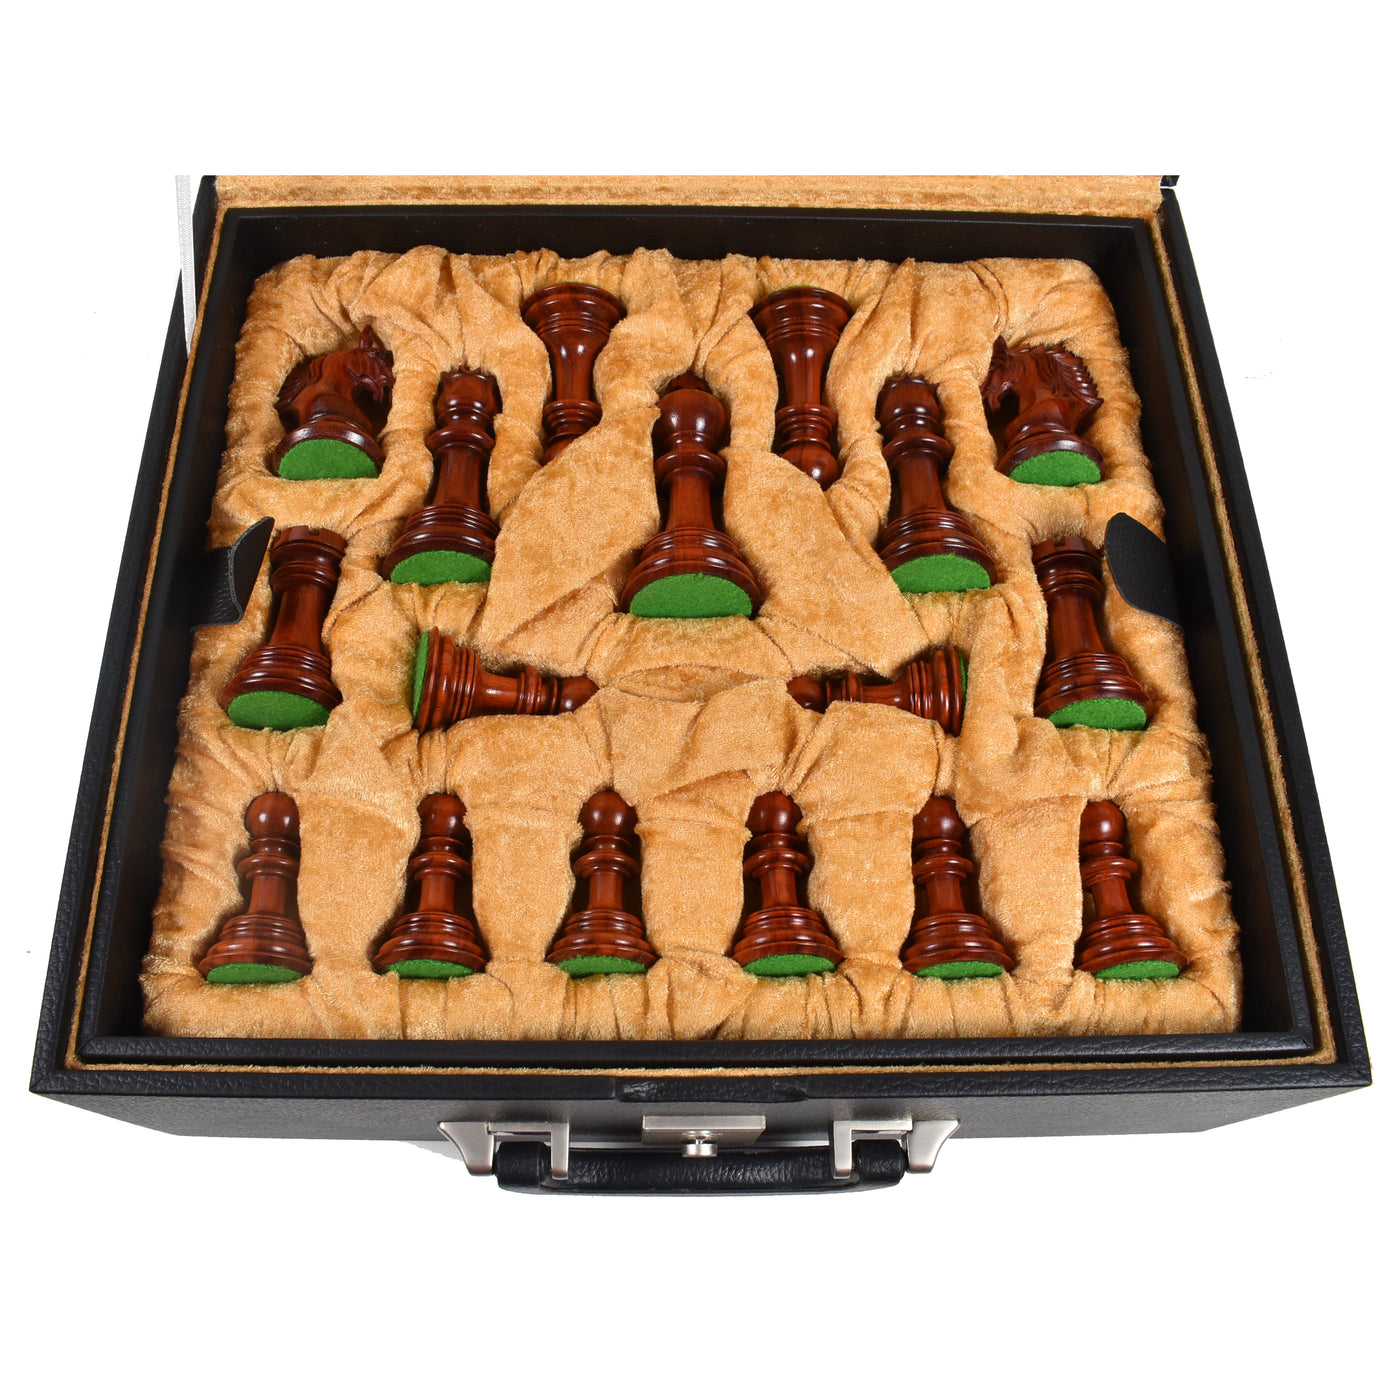 Arthur Luxury Staunton Chess Set Combo - Pieces in Bud Rosewood with 23" Wooden Chessboard and Storage Box